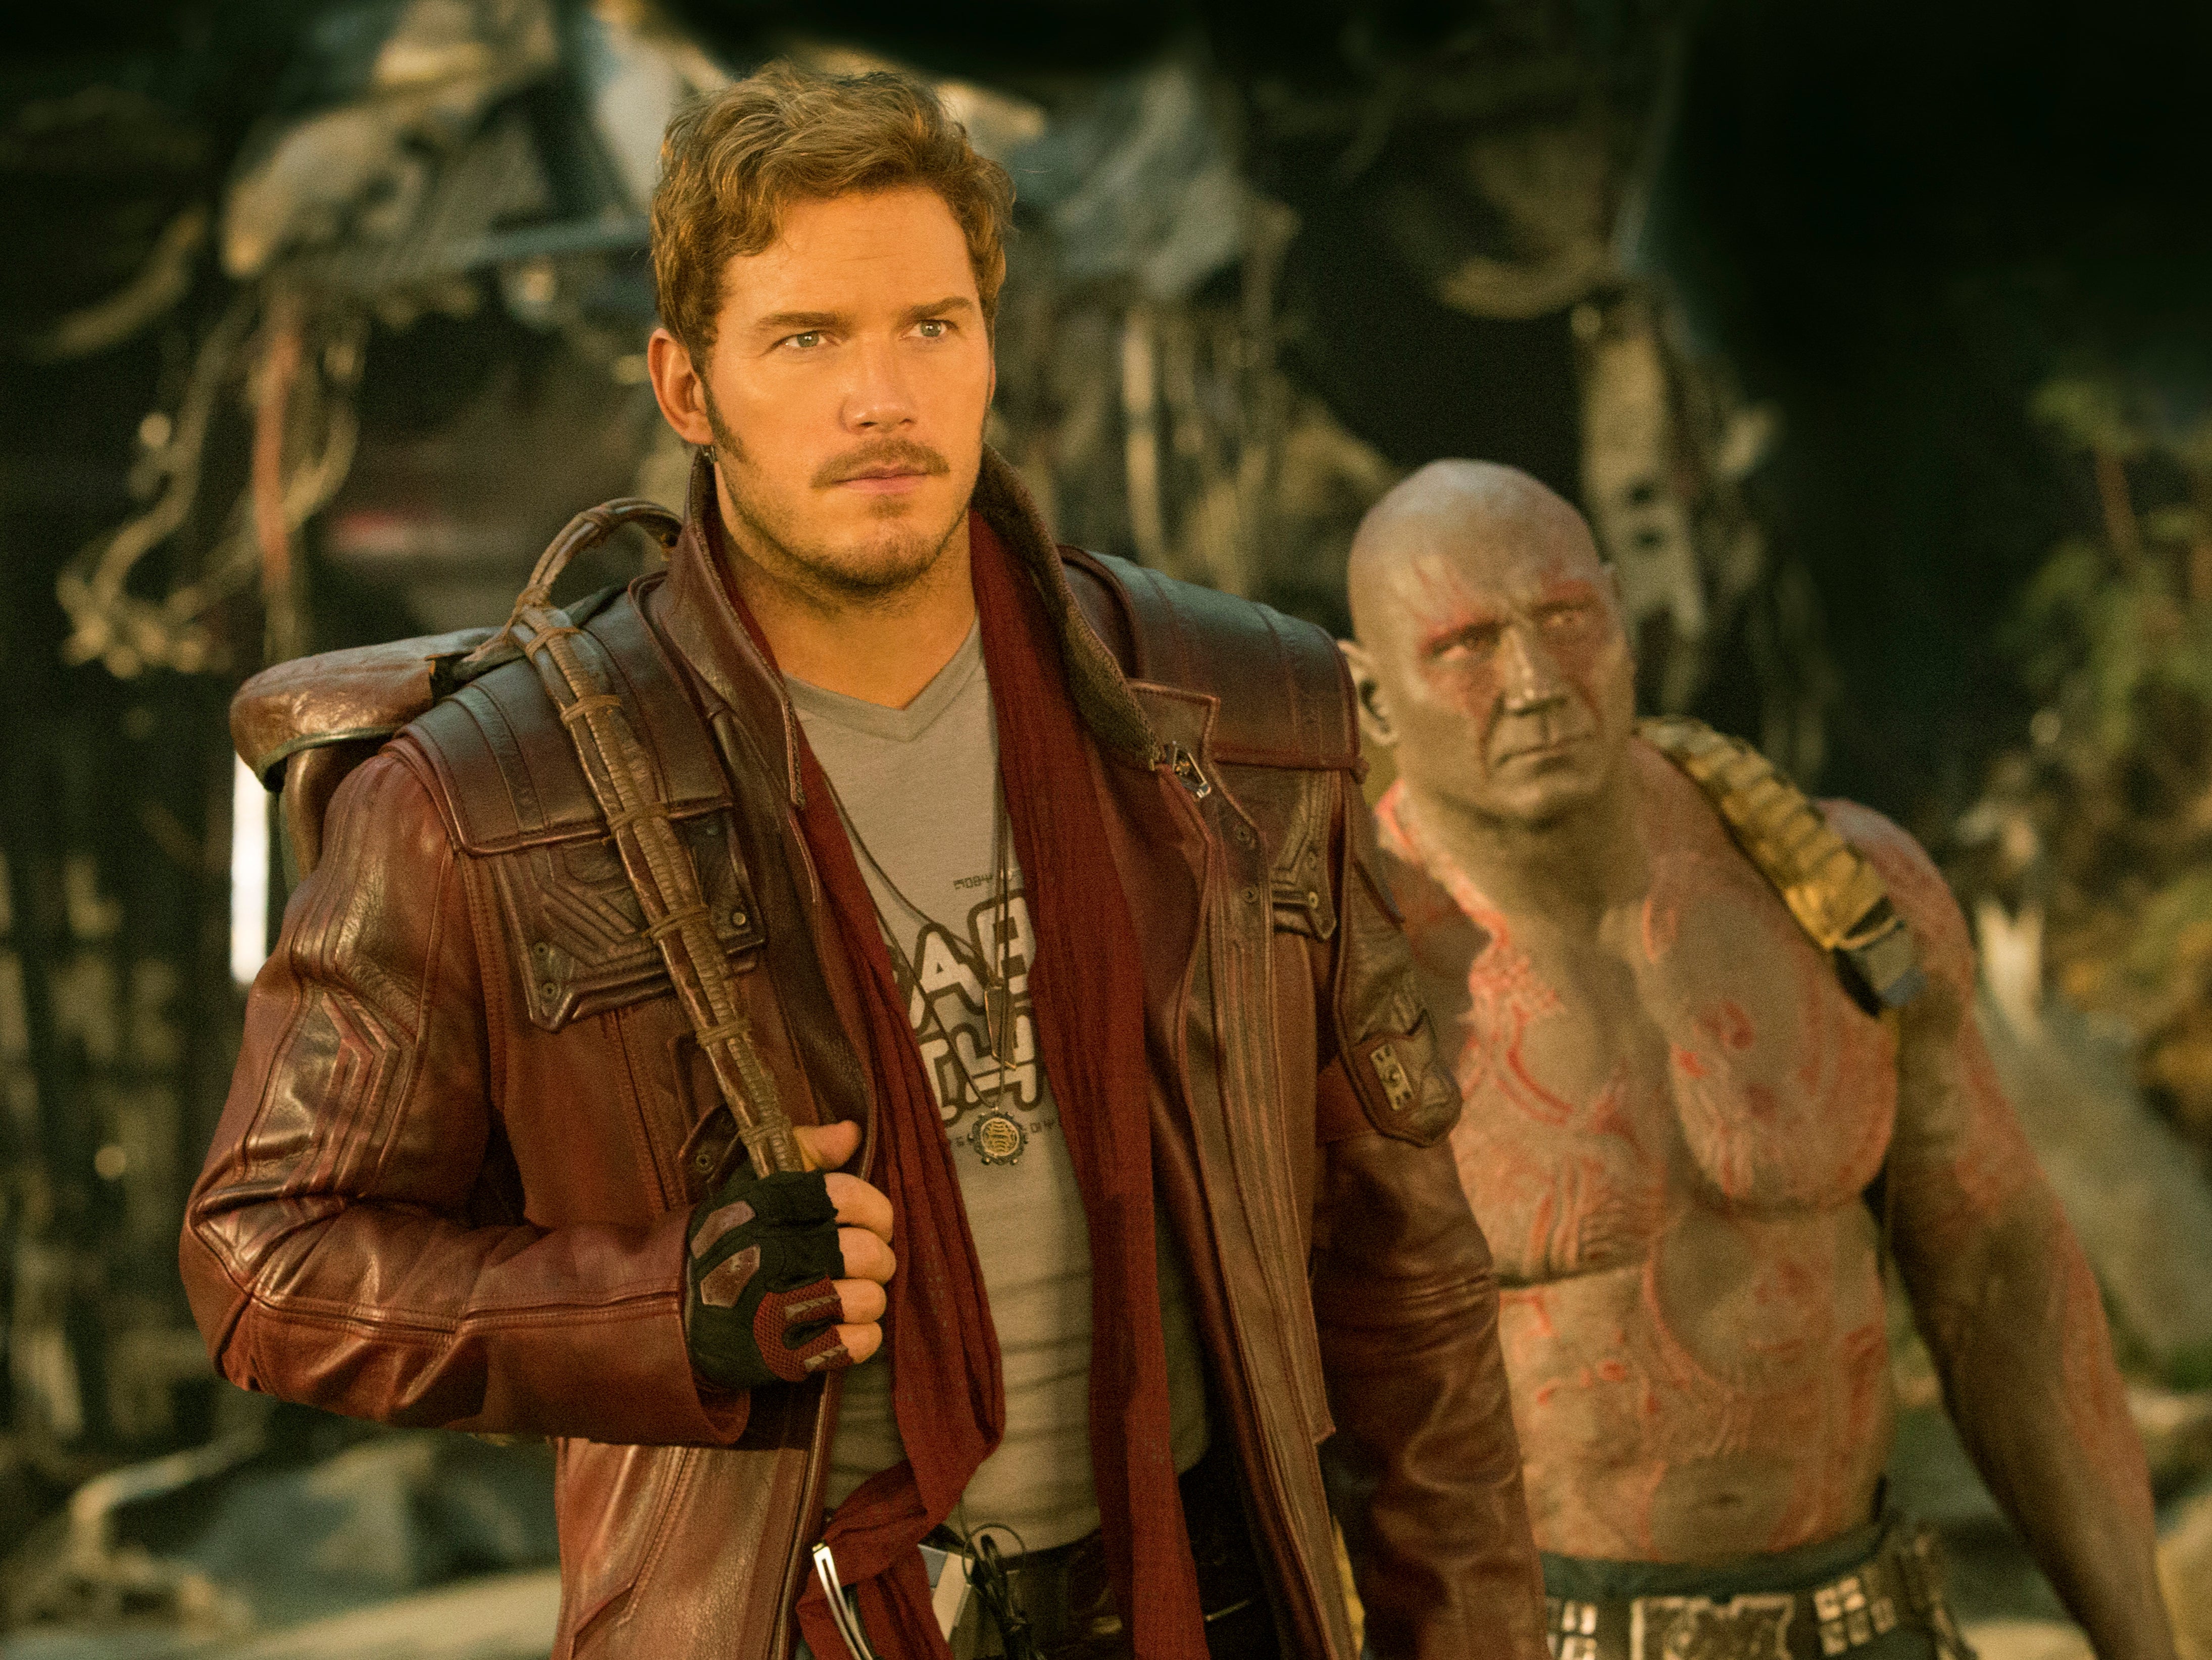 Chris Pratt and Dave Bautista in ‘Guardians of the Galaxy’